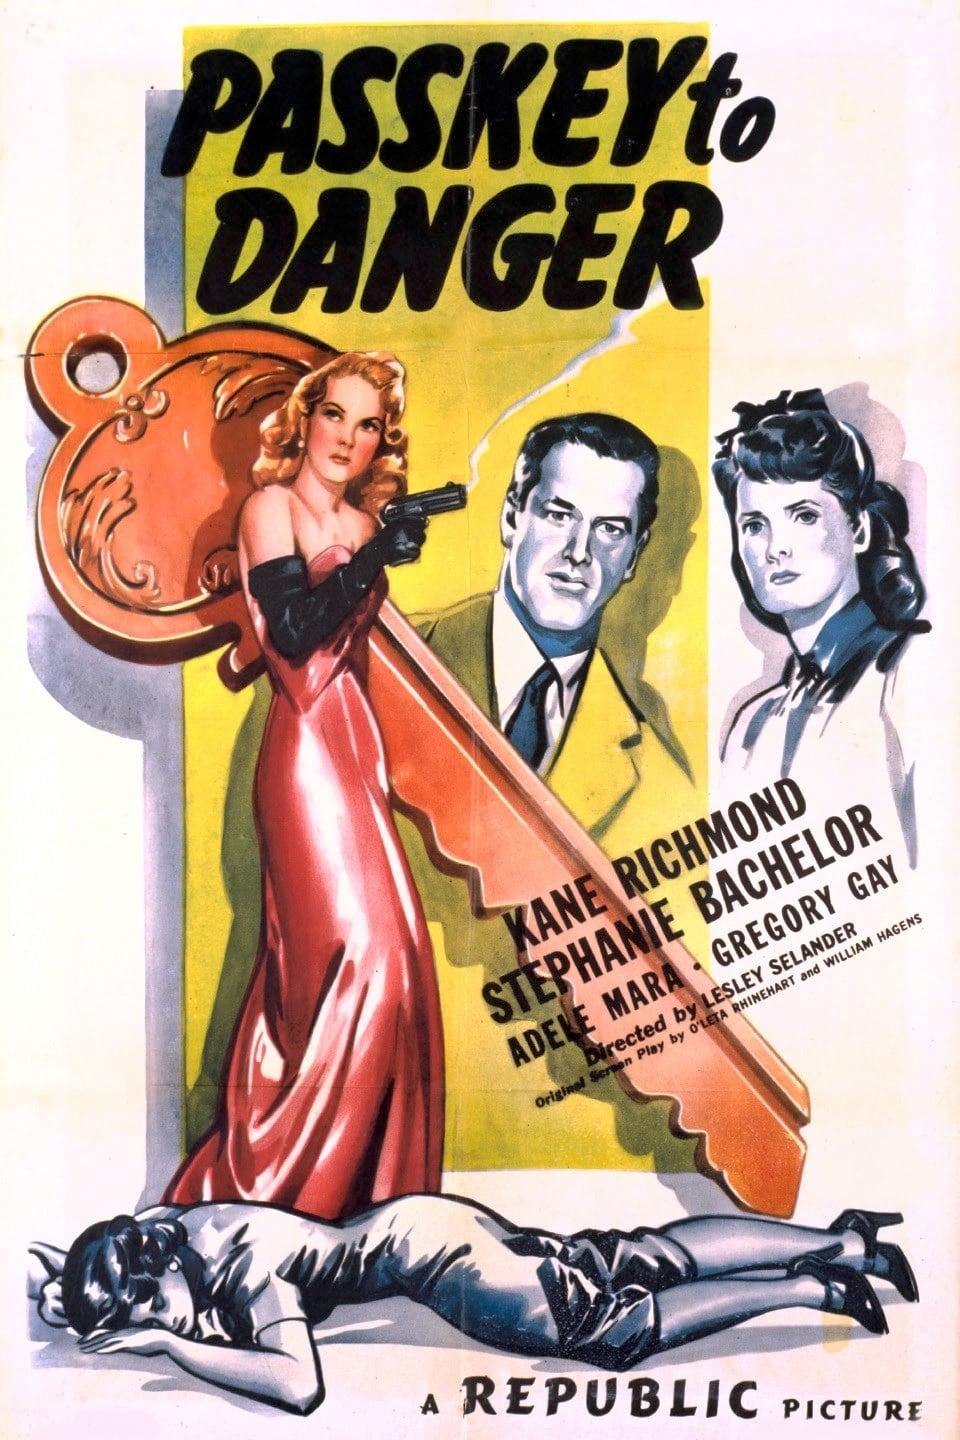 Passkey to Danger poster